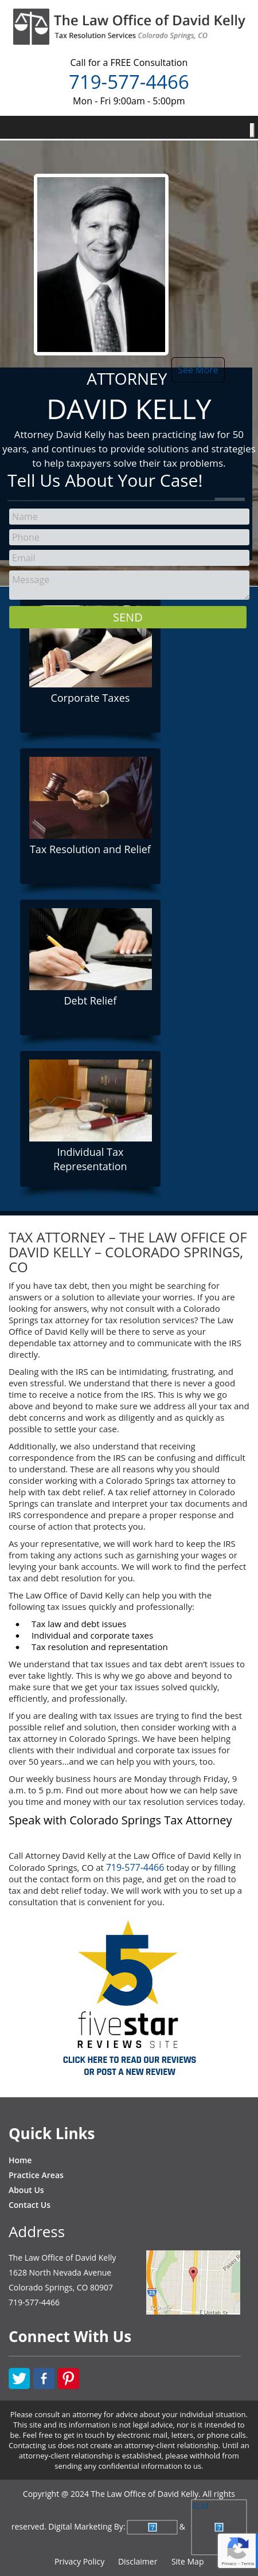 The Law Office of David Kelly - Colorado Springs CO Lawyers